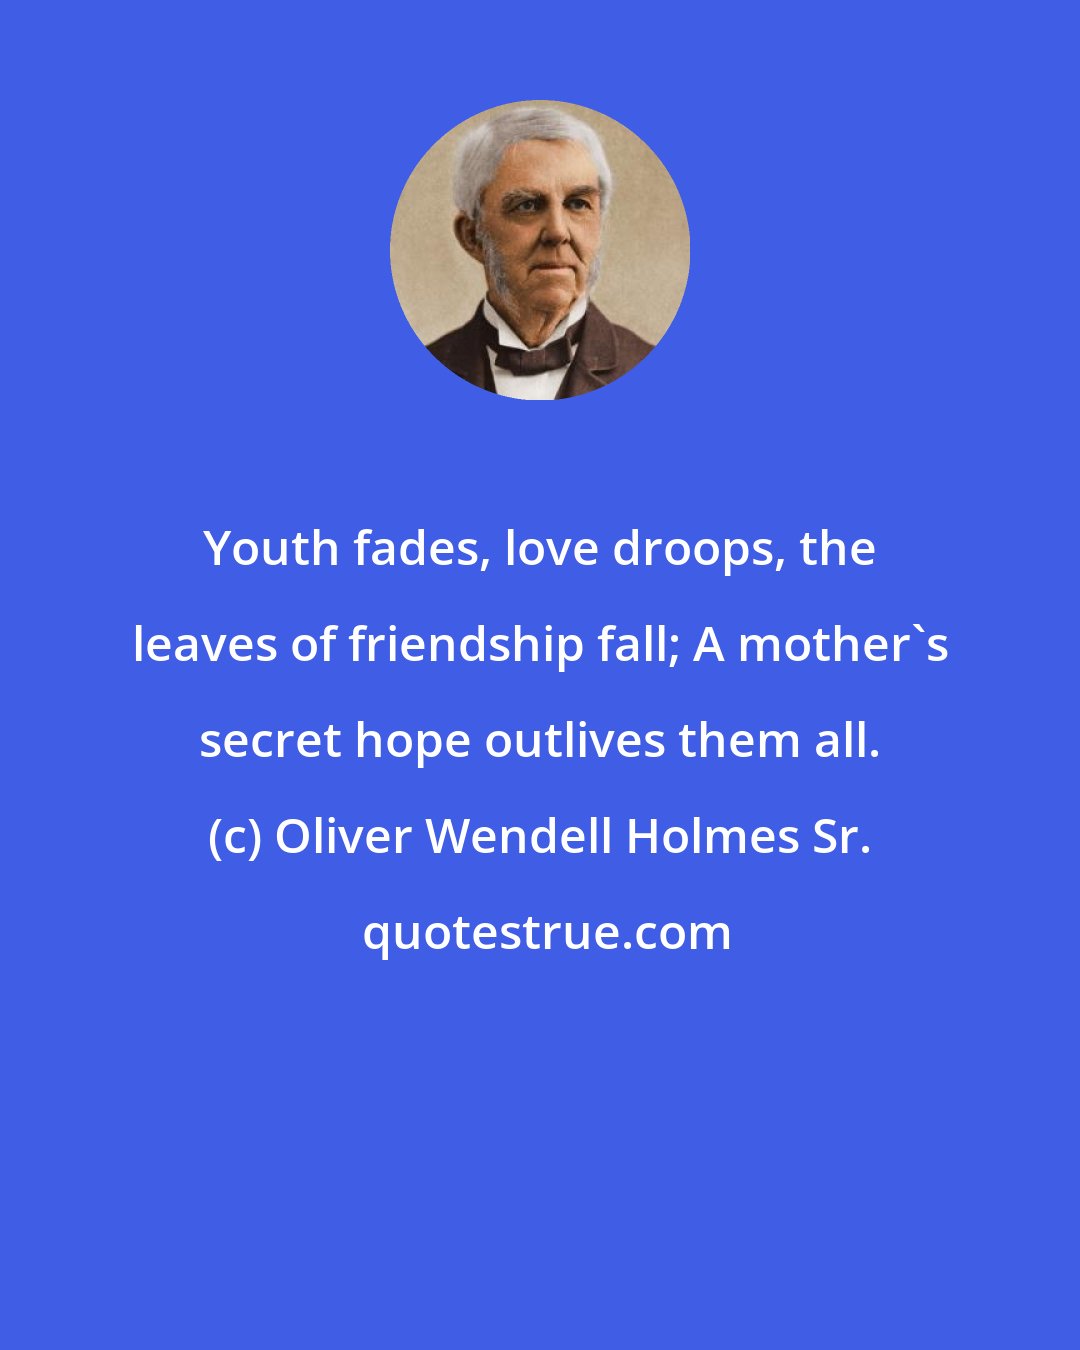 Oliver Wendell Holmes Sr.: Youth fades, love droops, the leaves of friendship fall; A mother's secret hope outlives them all.